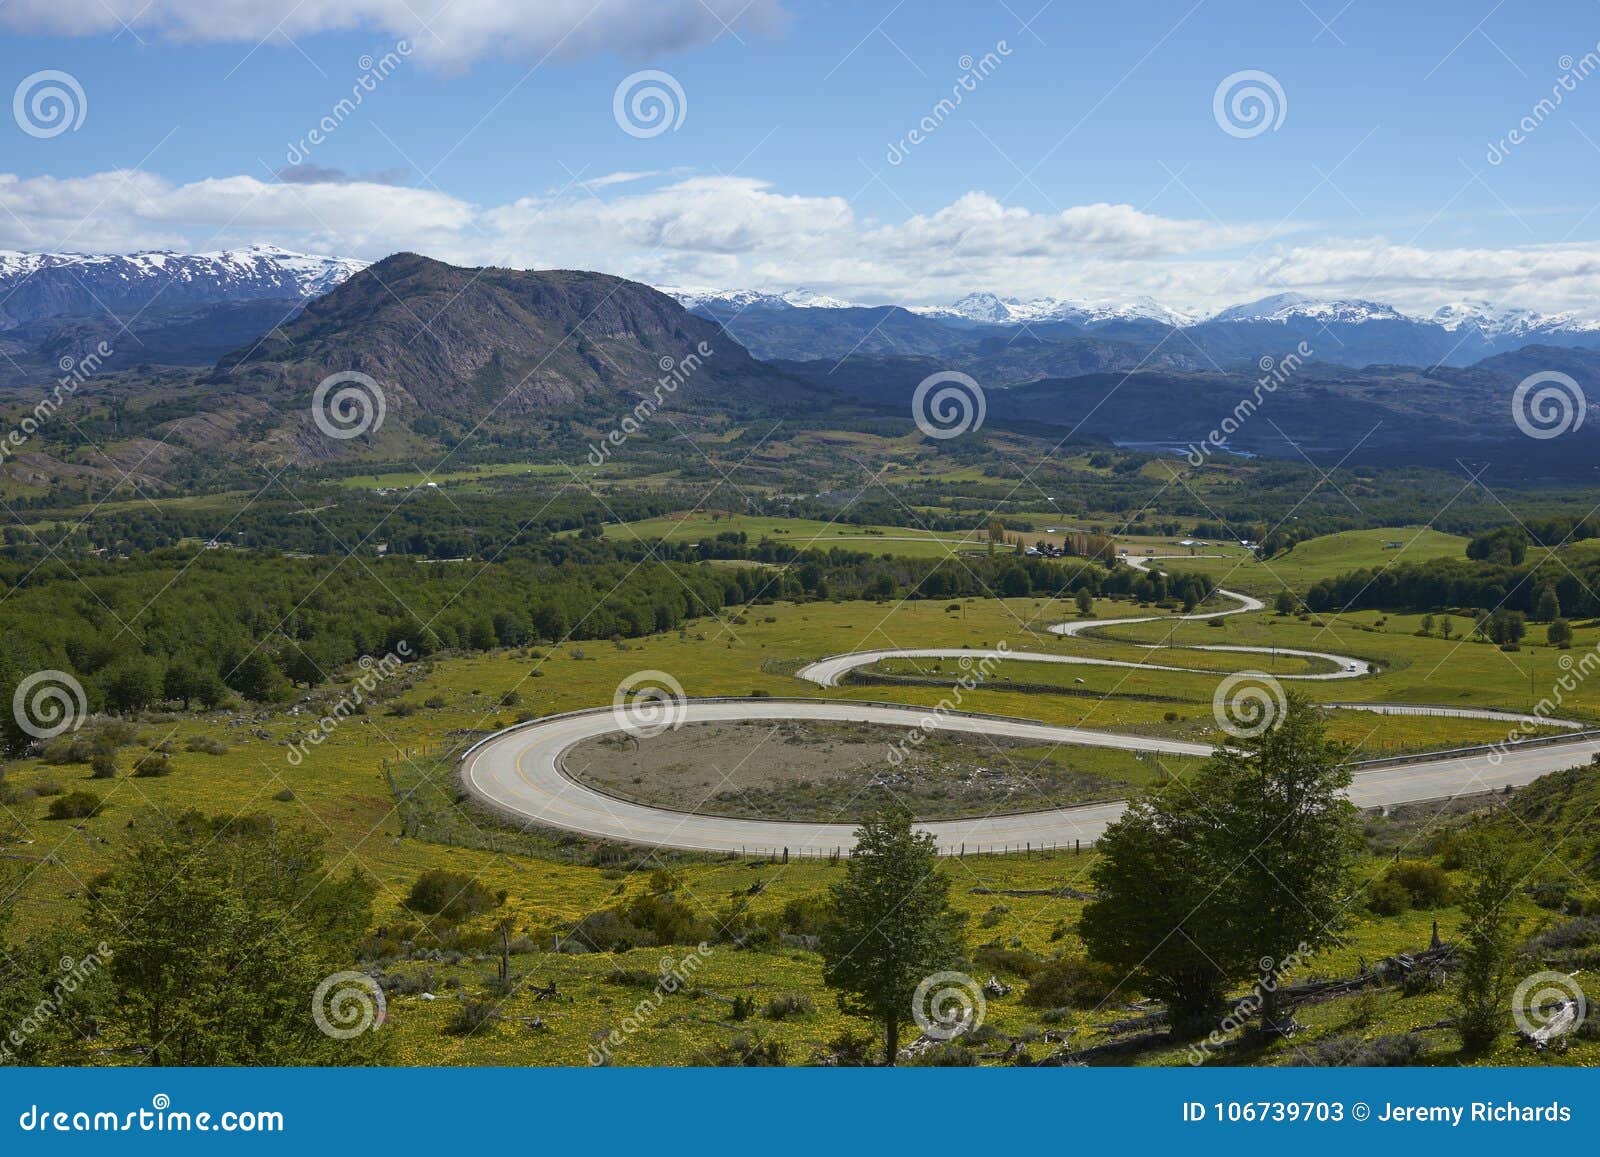 the carretera austral in northern patagonia, chile